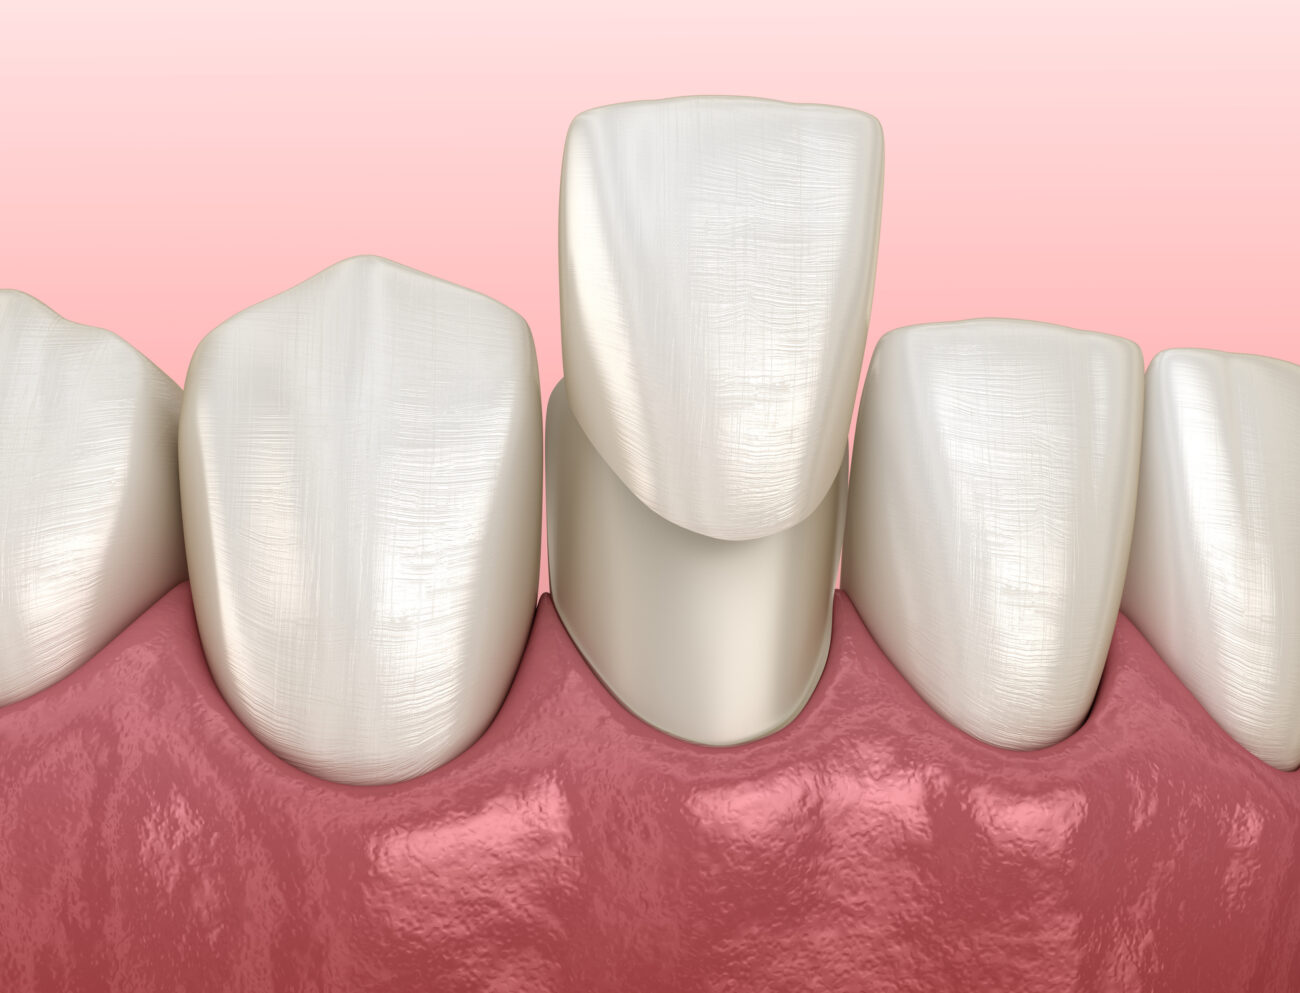 Cosmetic dentistry in Flower Mound, TX, can help fix a variety of imperfections in your smile